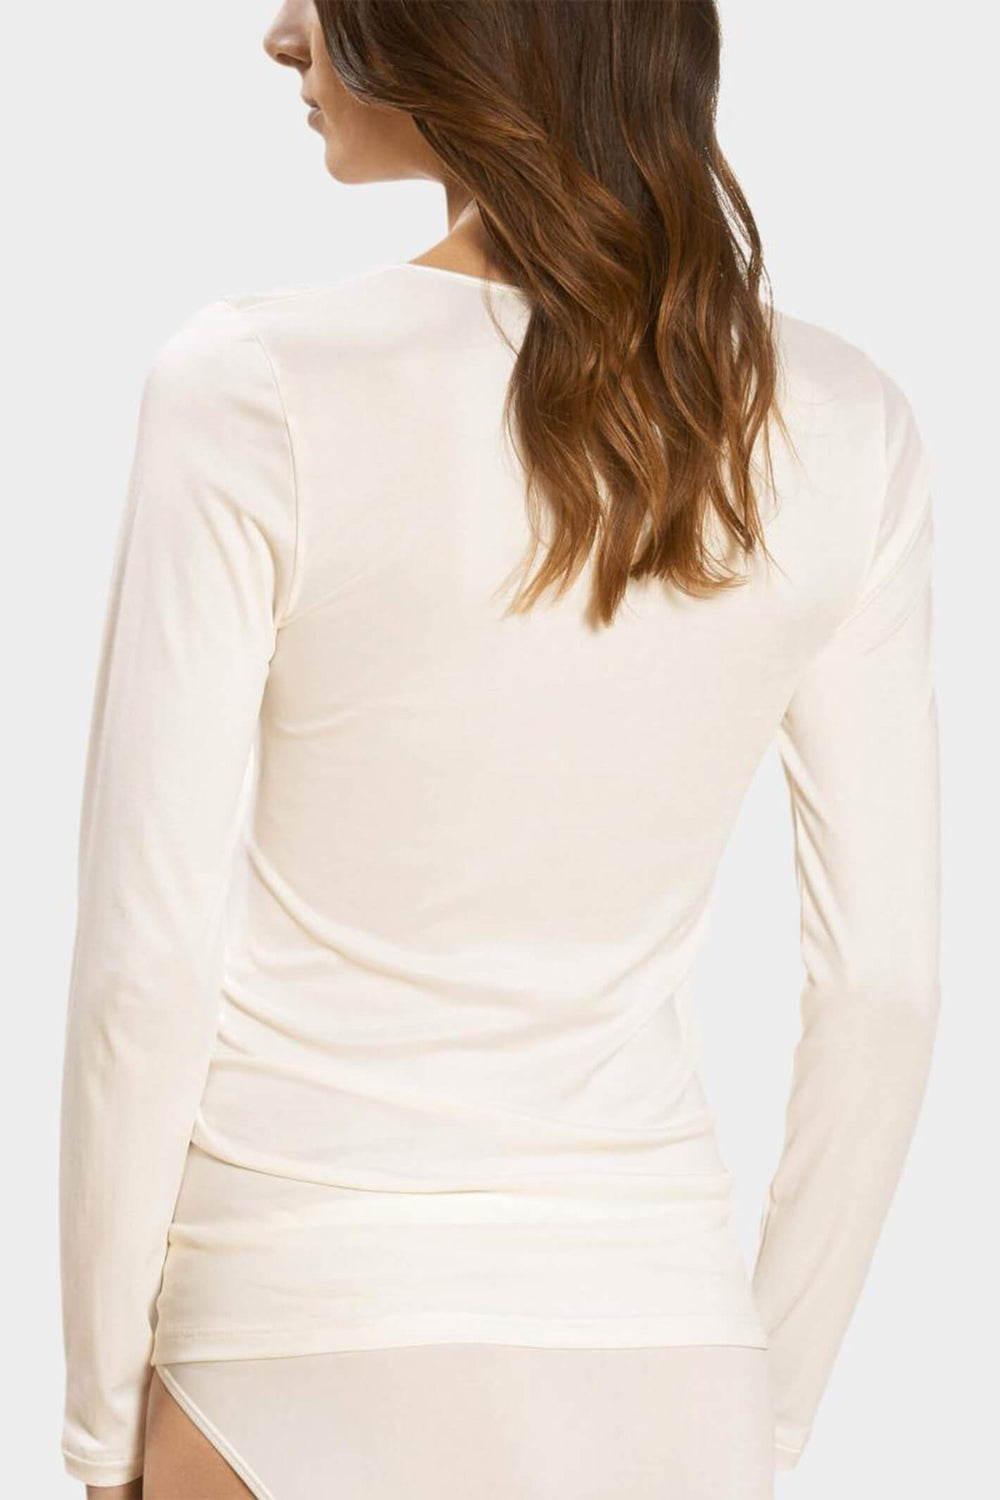 Mey 56202 Champagne Long Sleeved Top - Olivia Grace Fashion